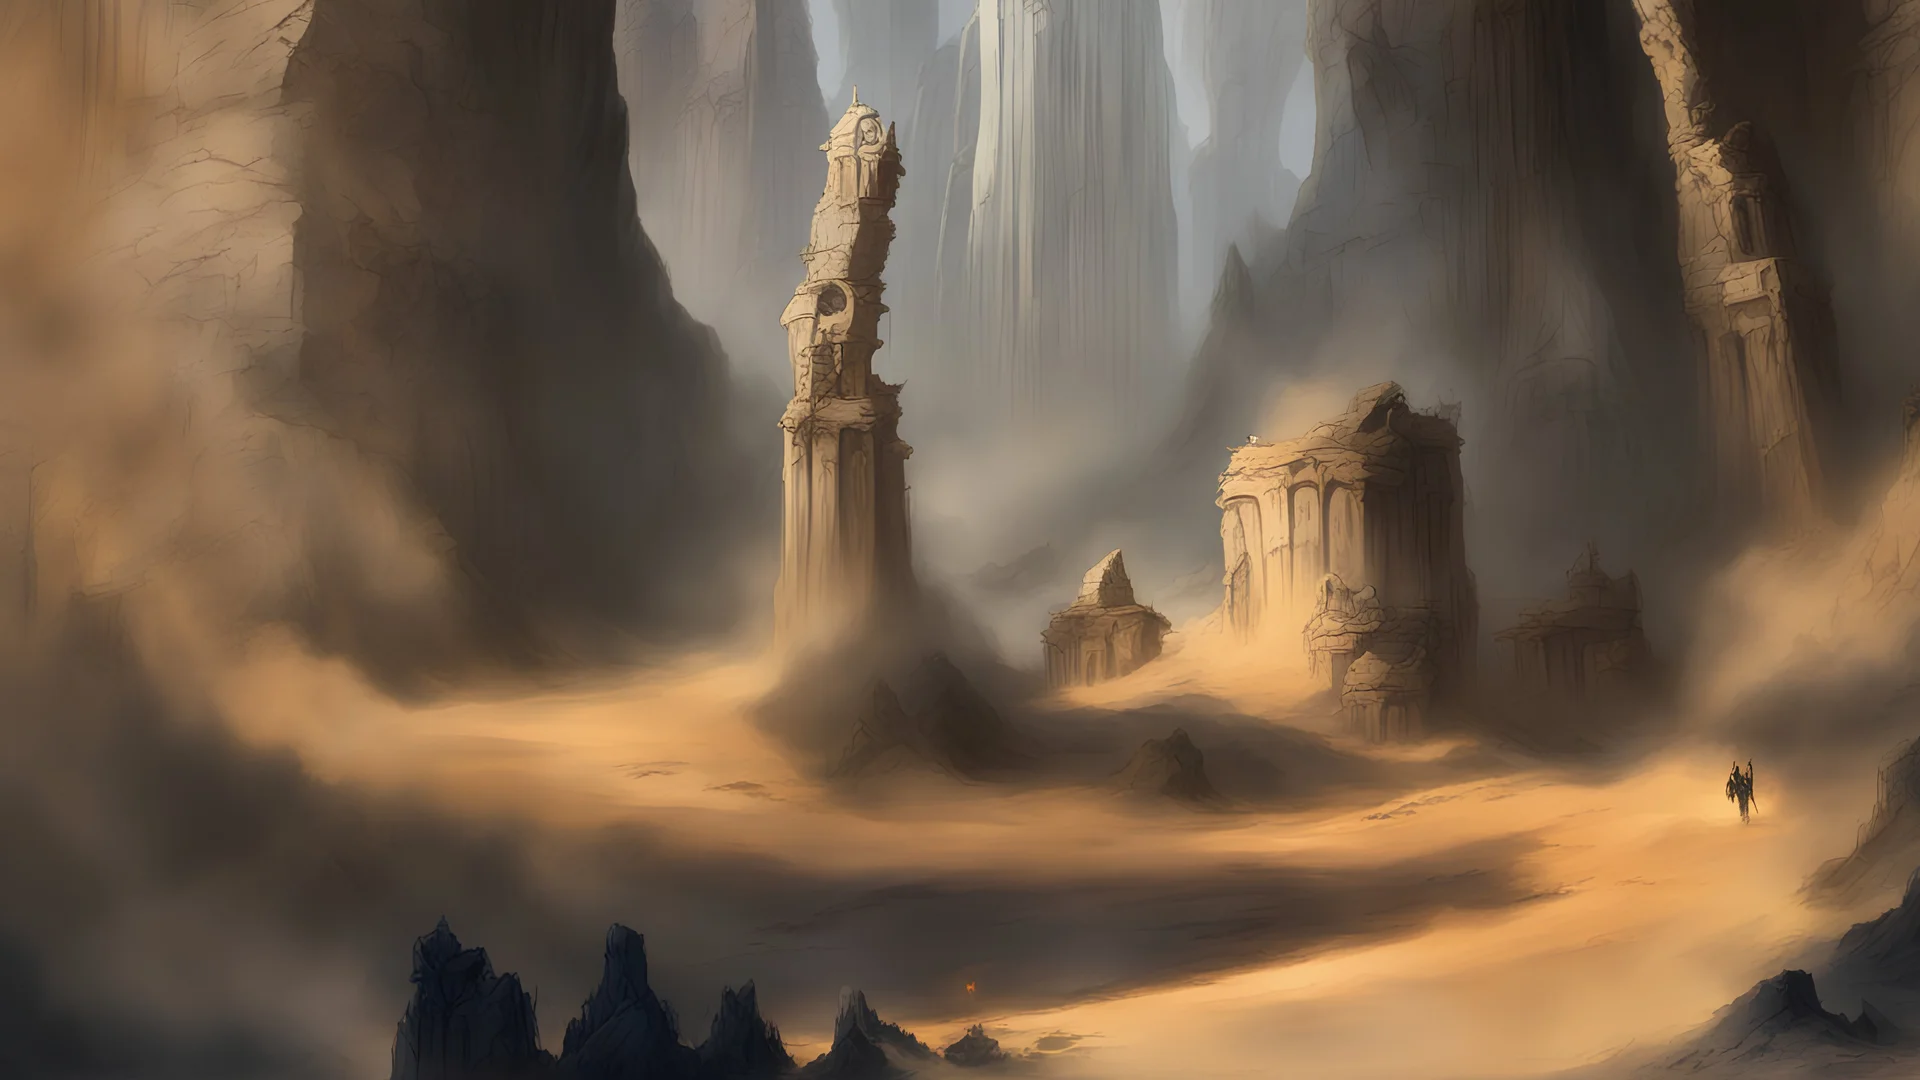 Concept art scary fantasy desert cave dungeon entrance